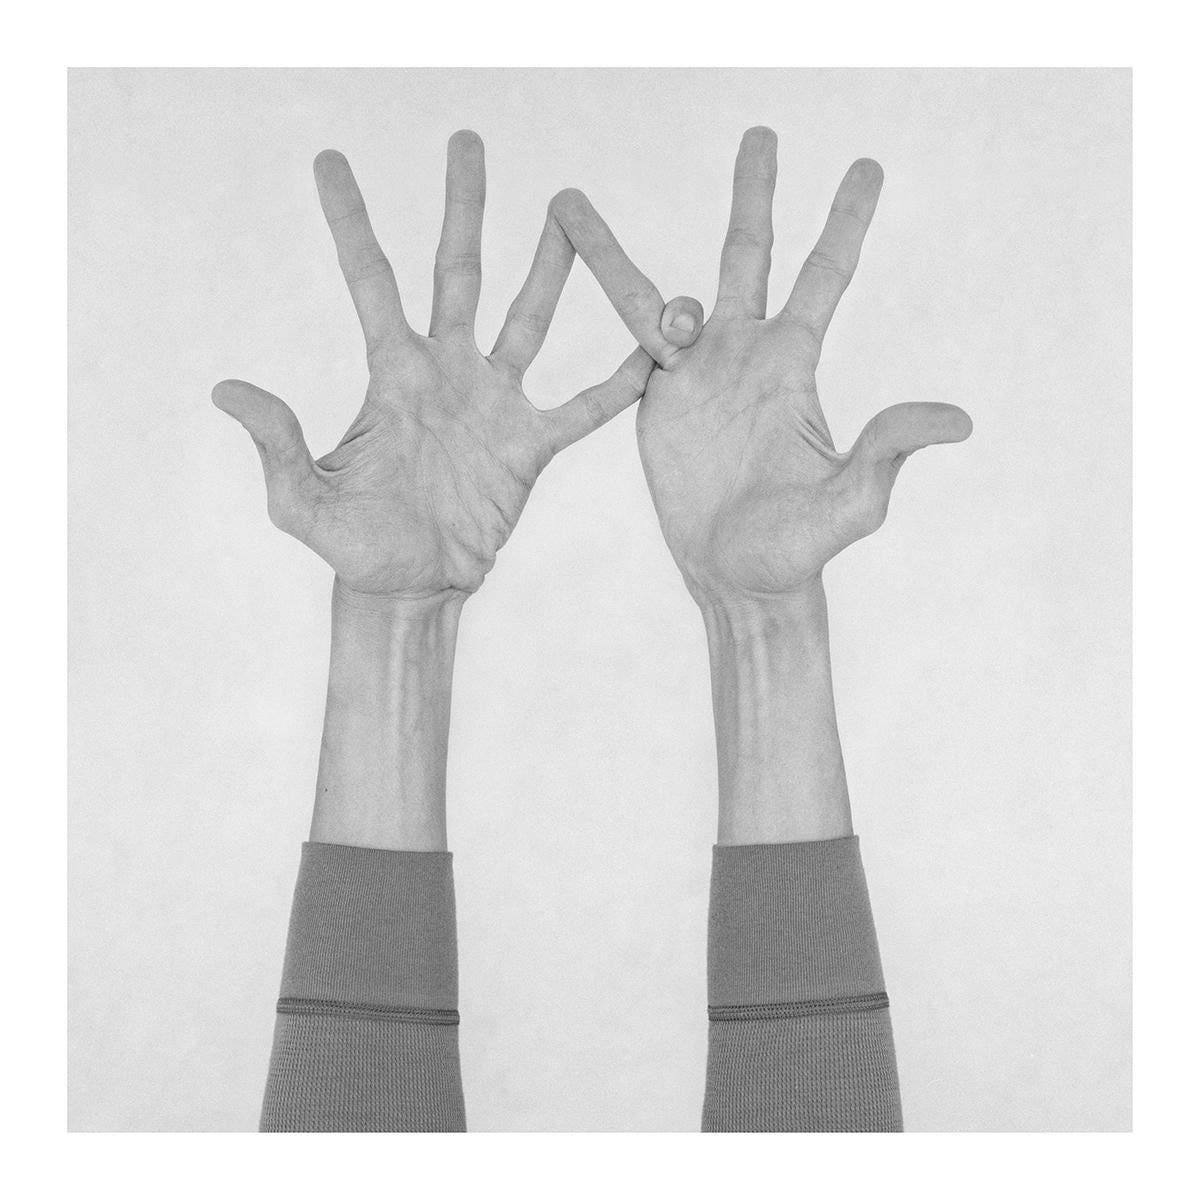 Untitled I, Untitled II, and Untitled XI, Hands. From the Series Chiromorphose - Aesthetic Movement Photograph by Nico Baixas / Gos-com-fuig